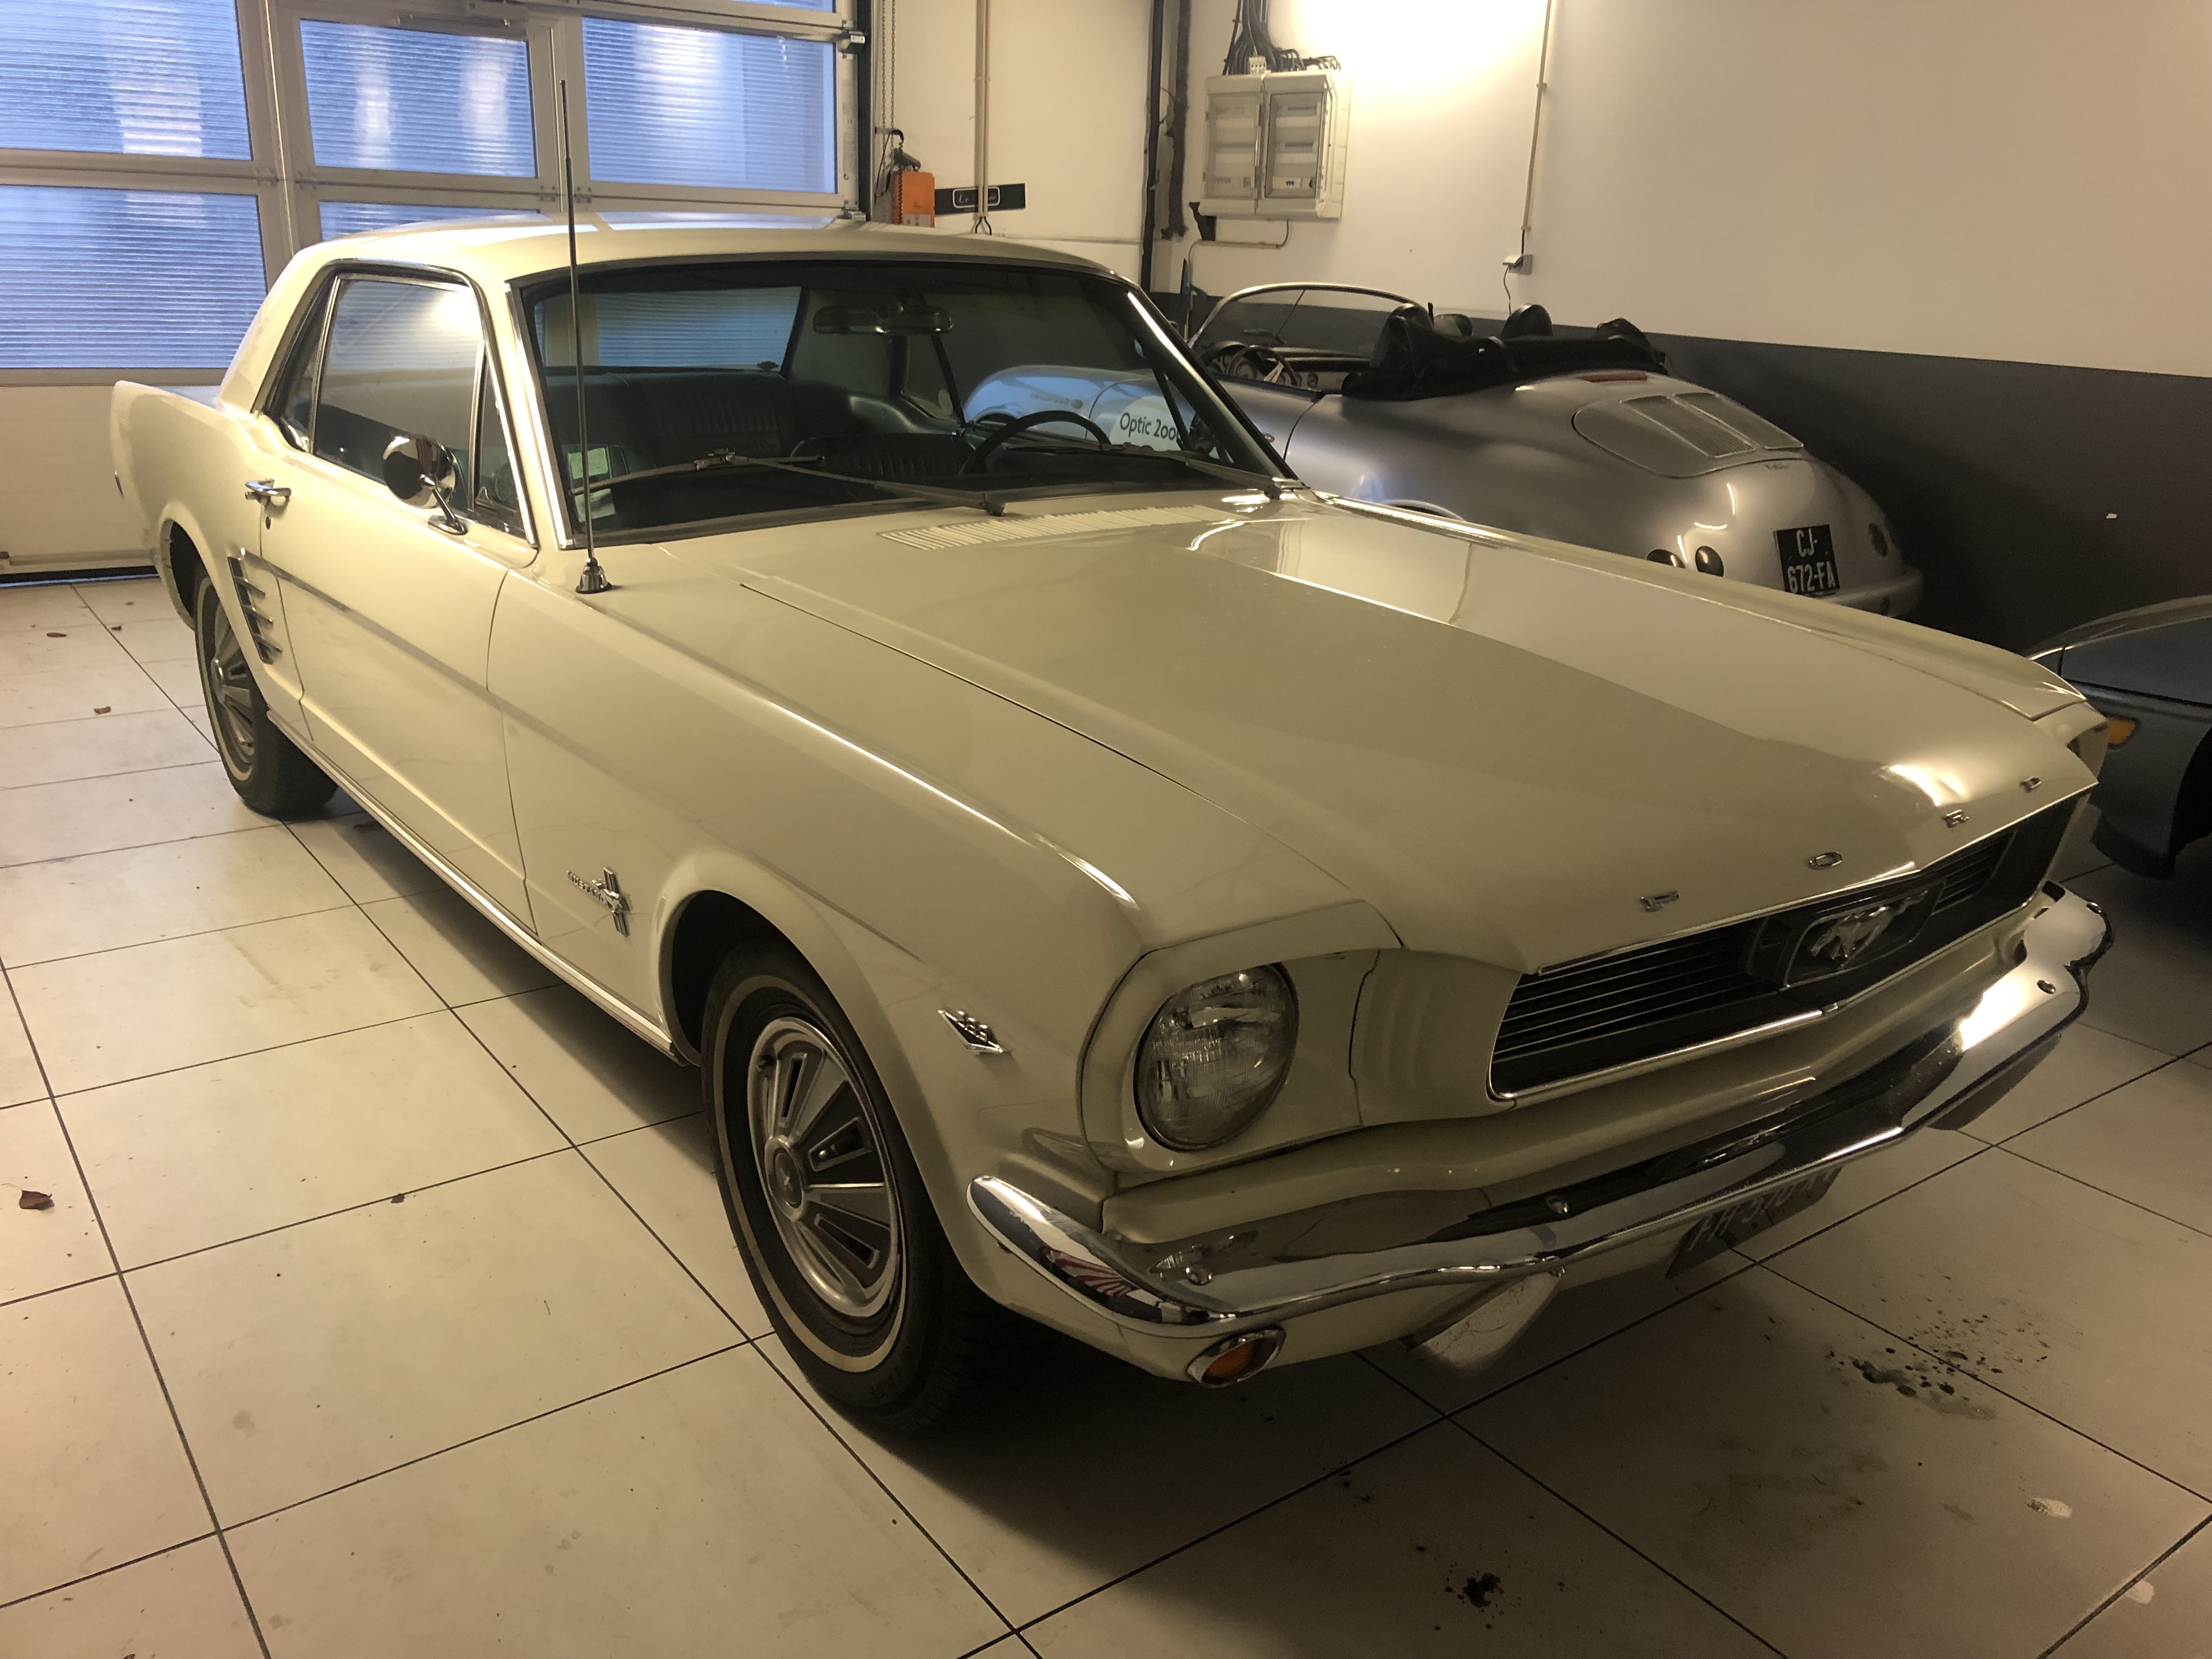 ford-mustang-essence-annee-1966-36-900